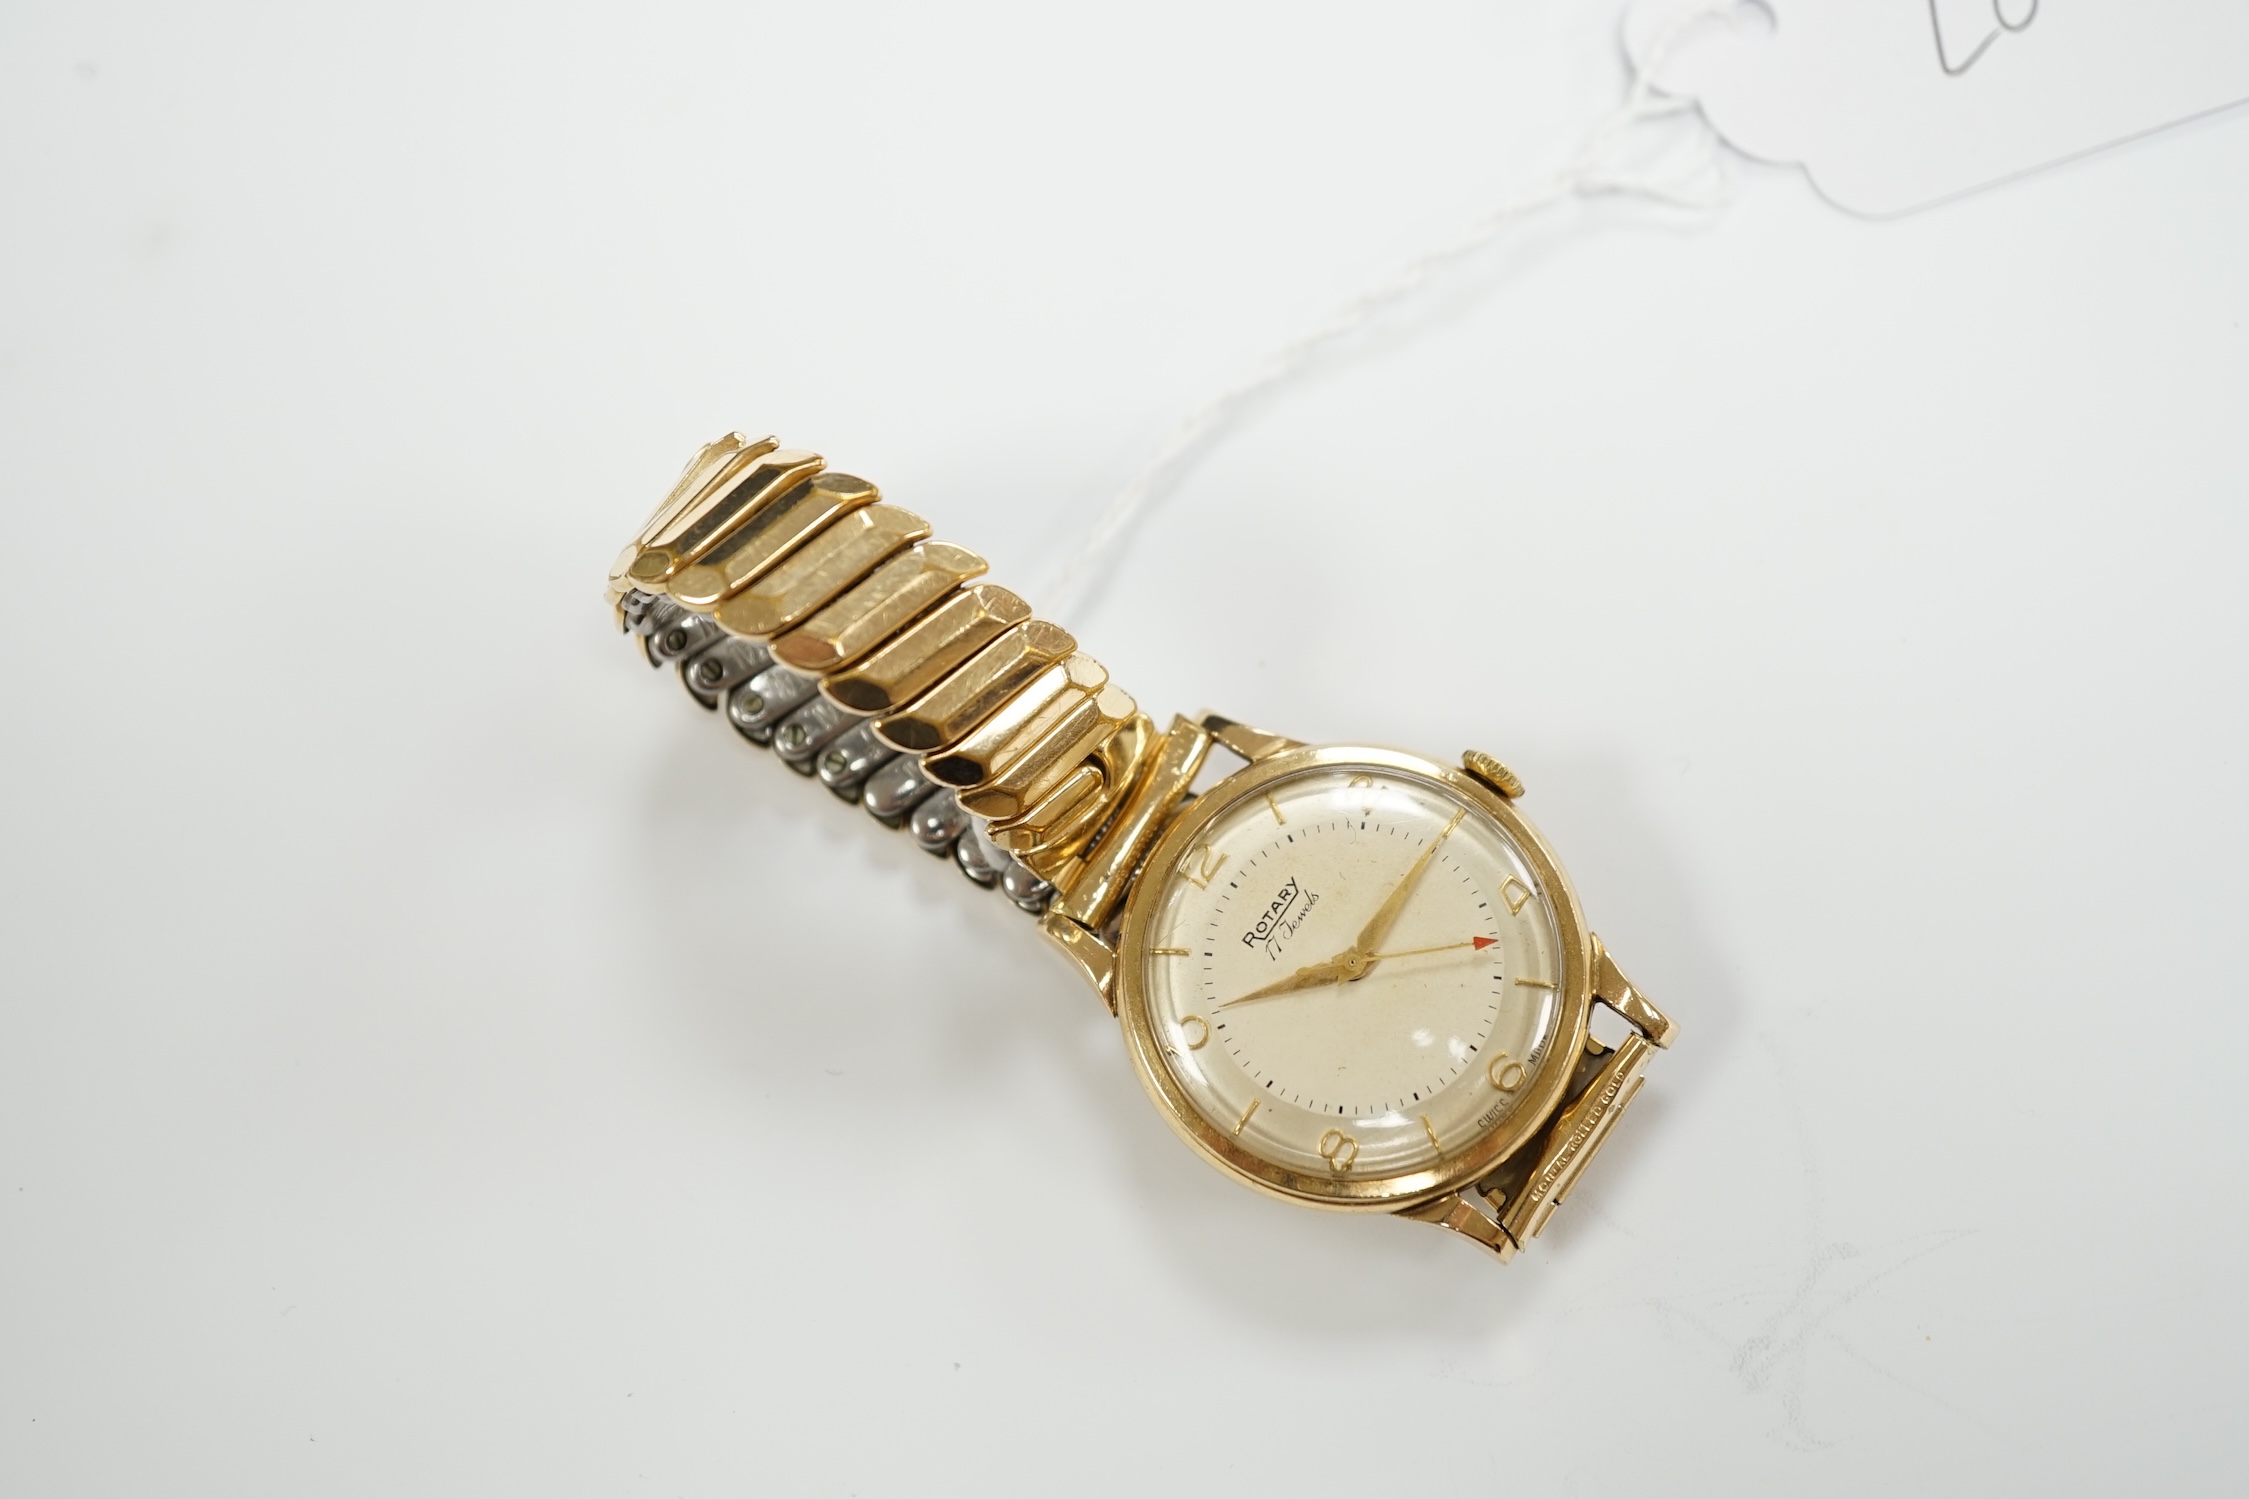 A gentleman's 1950's 9ct gold Rotary manual wind wrist watch, with associated steel and gold plated flexible bracelet.